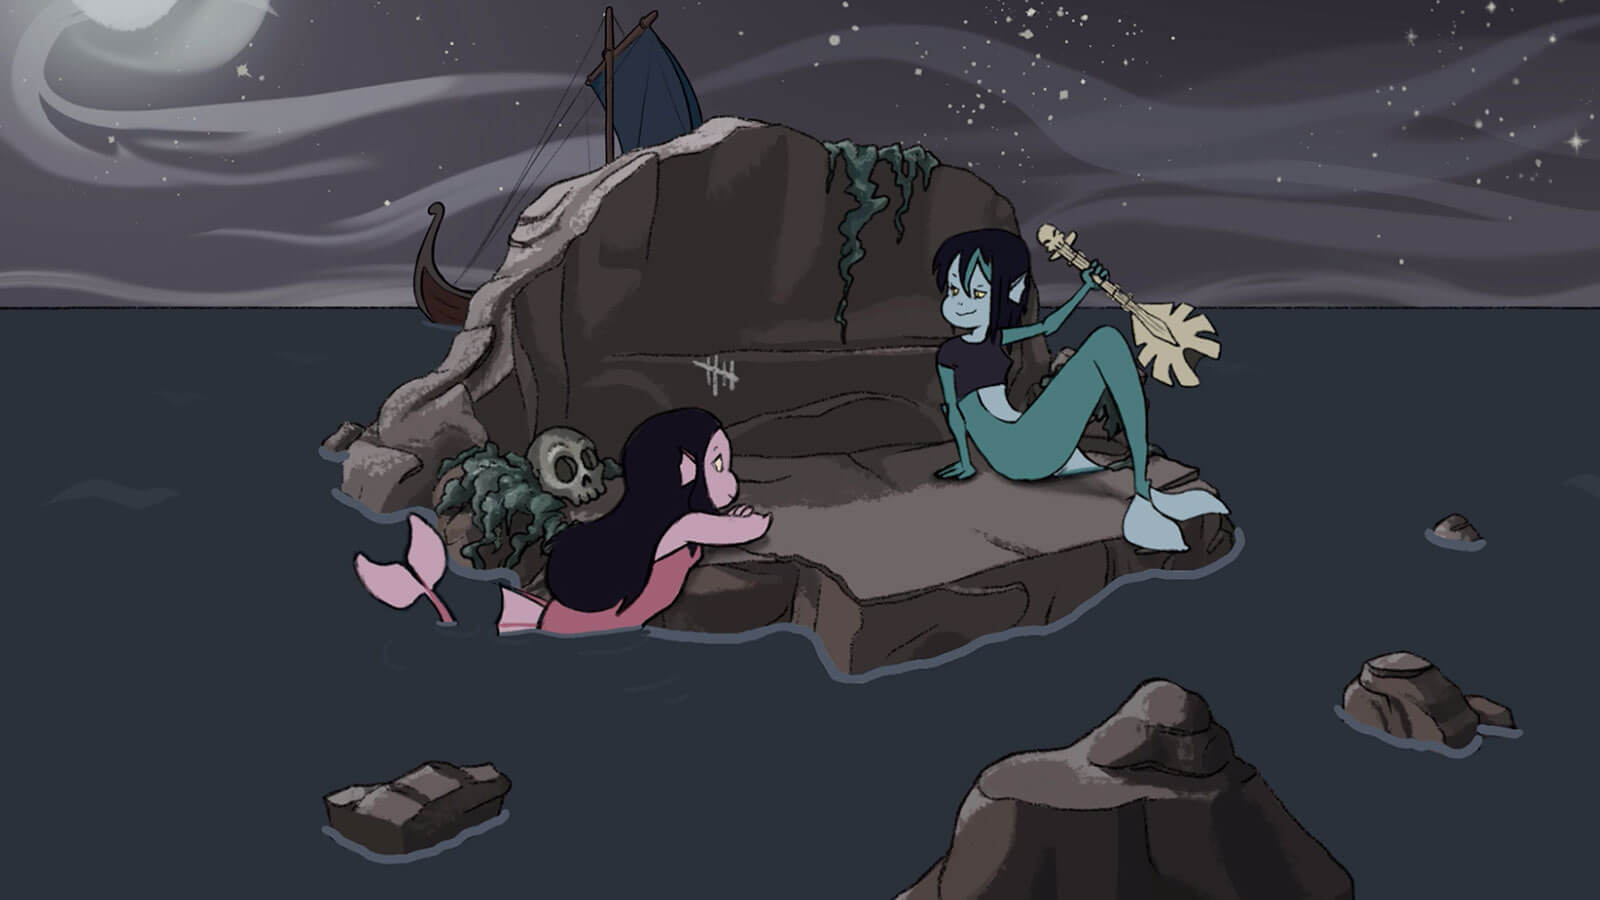 Two mermaids lounge on a small rocky island